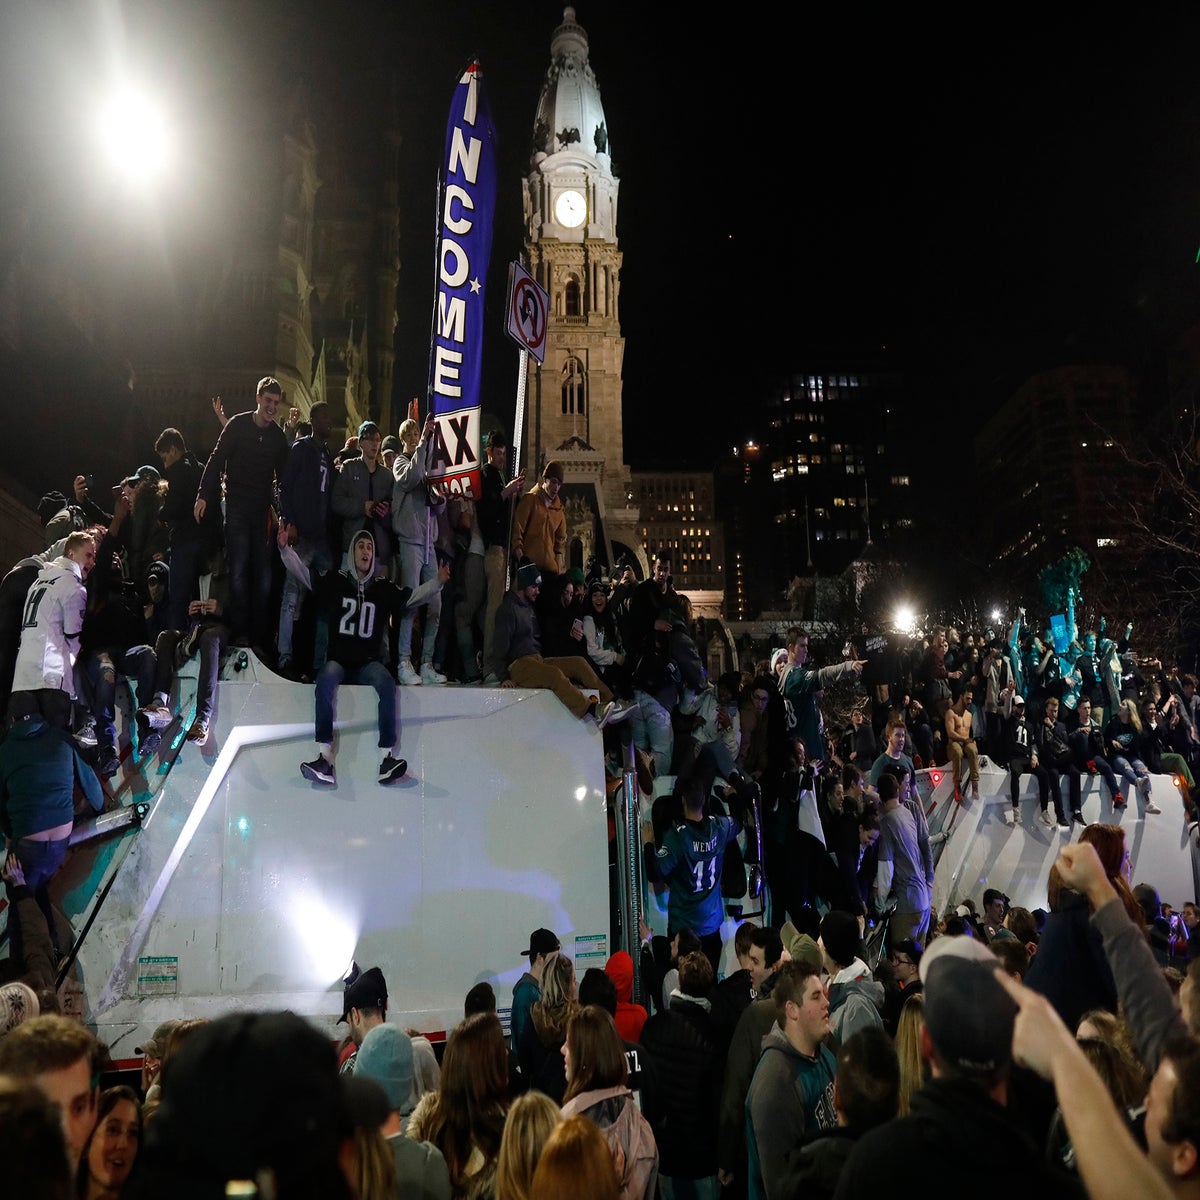 Rowdy fans take to streets after Philadelphia Eagles Super Bowl